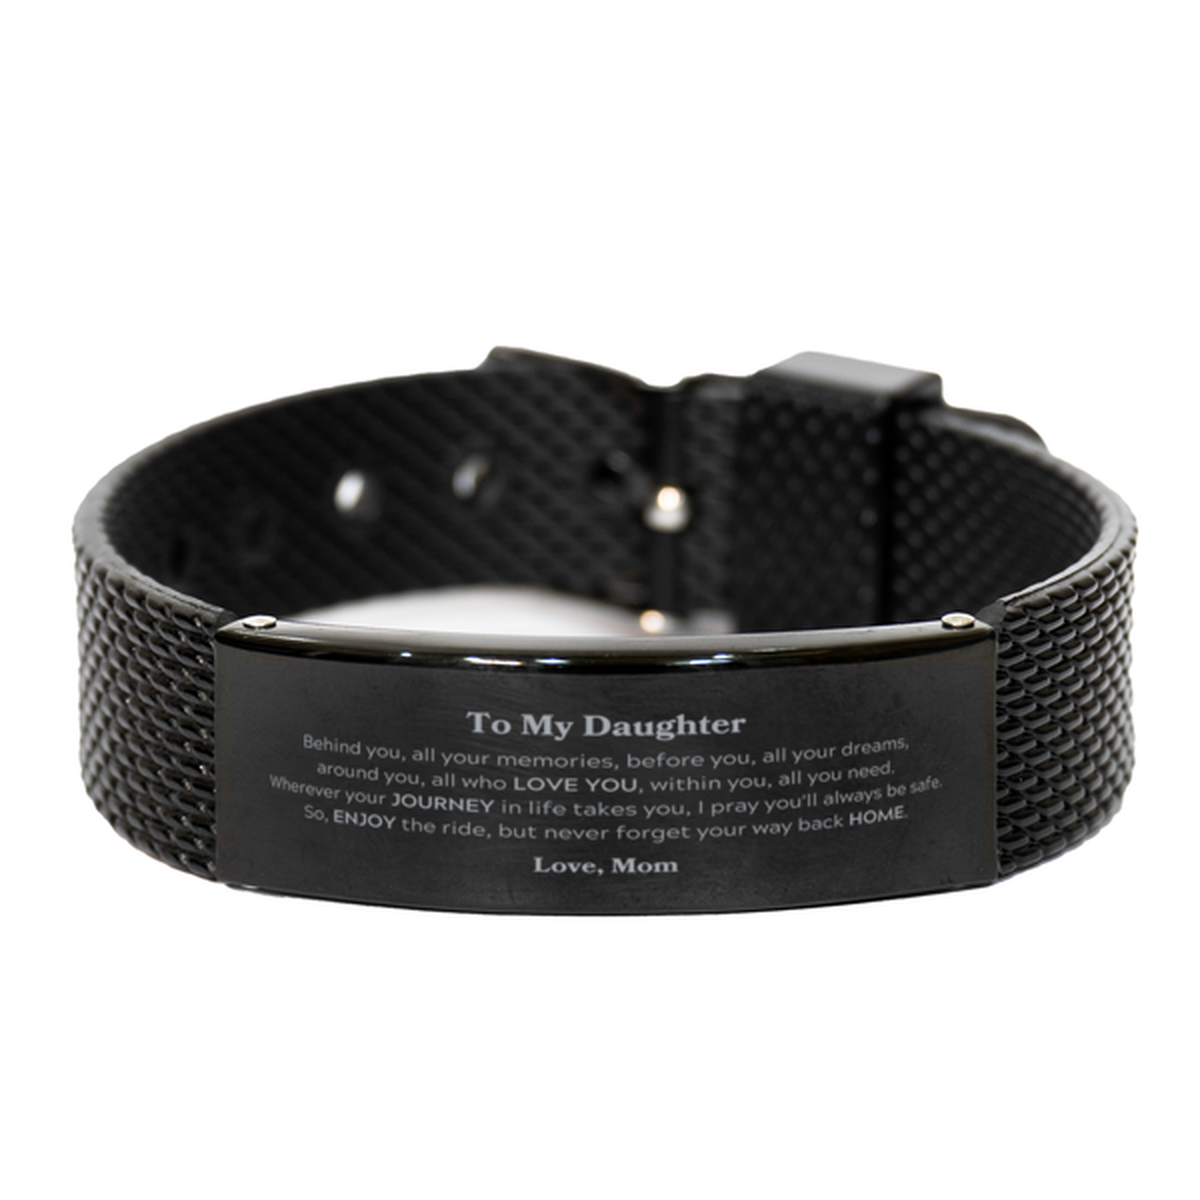 To My Daughter Graduation Gifts from Mom, Daughter Black Shark Mesh Bracelet Christmas Birthday Gifts for Daughter Behind you, all your memories, before you, all your dreams. Love, Mom